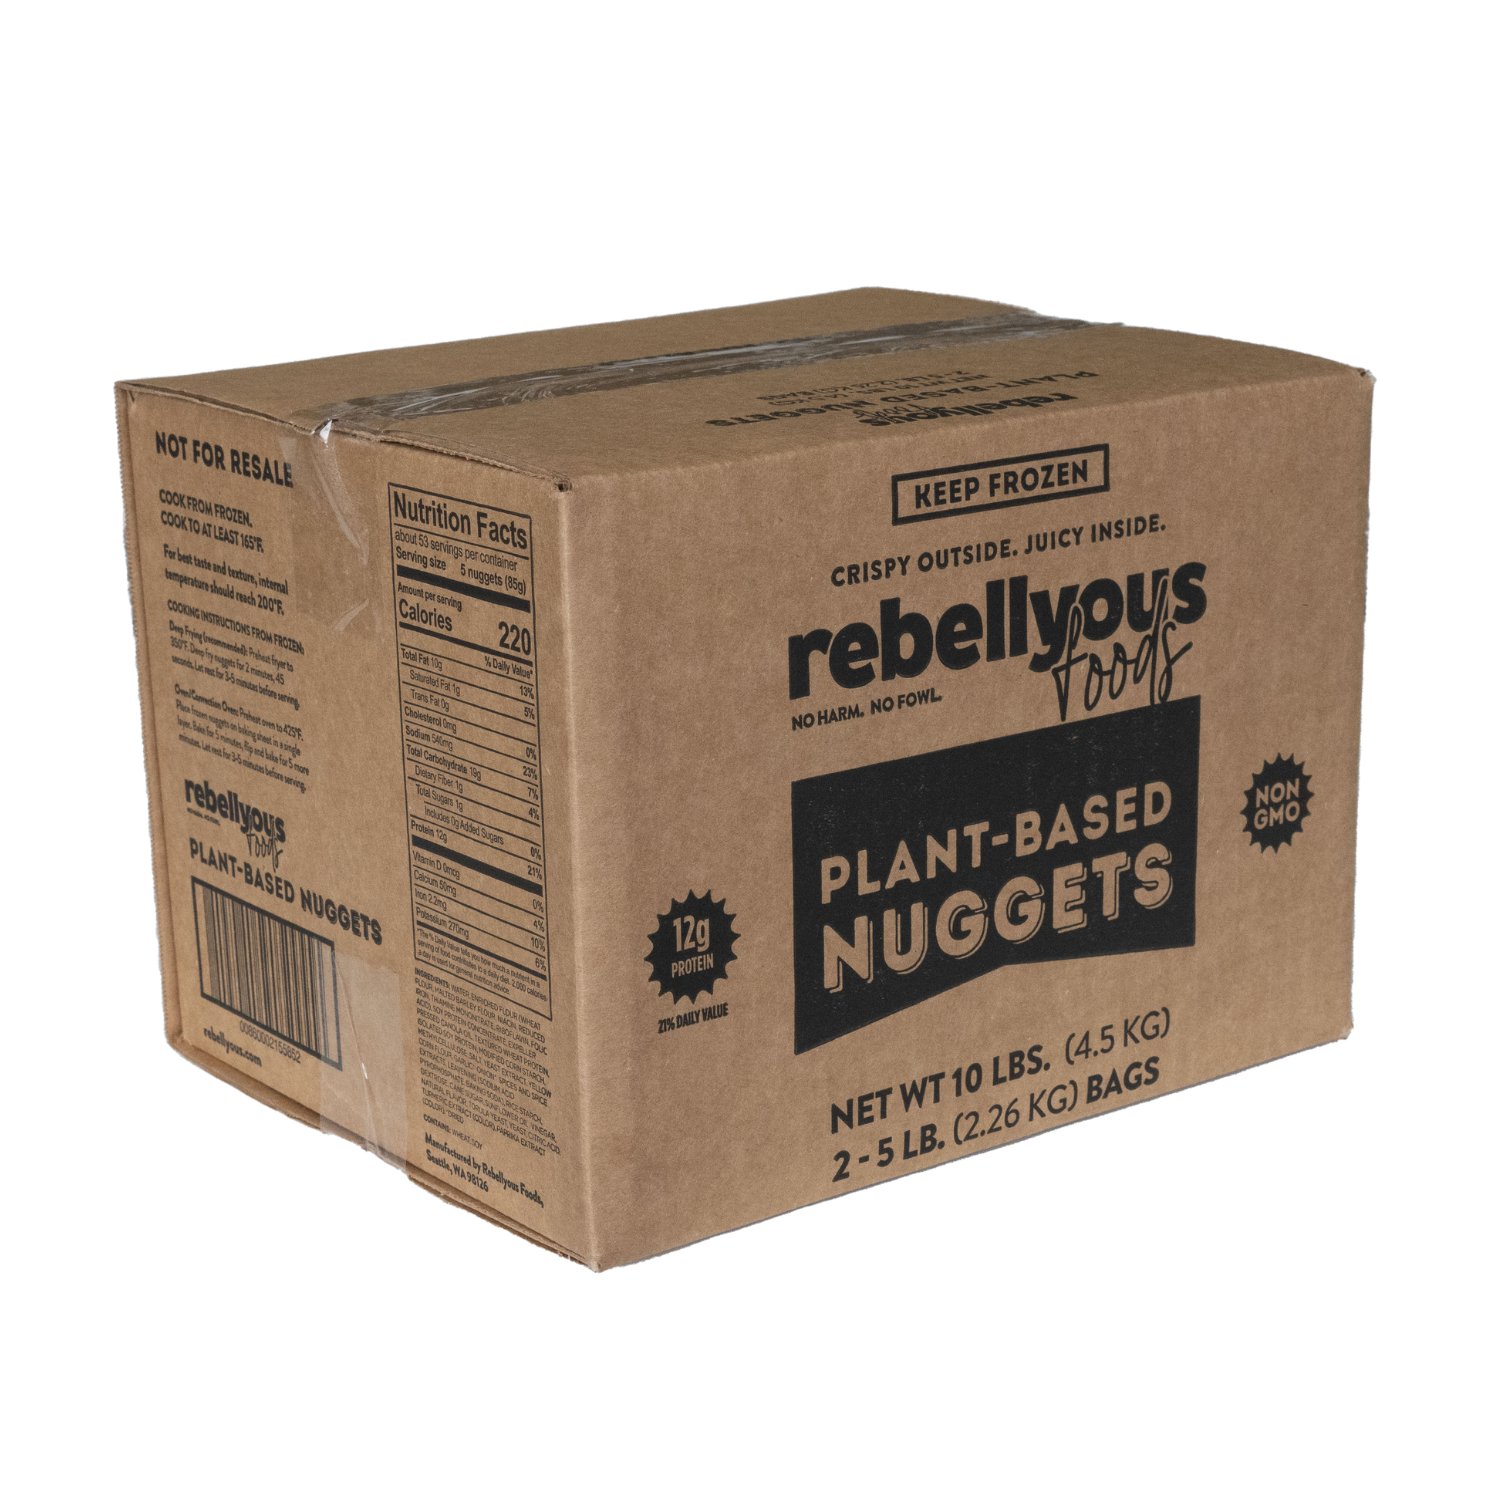 Rebellyous Nuggets (Soy + Wheat) 1 units per case 10.0 lbs